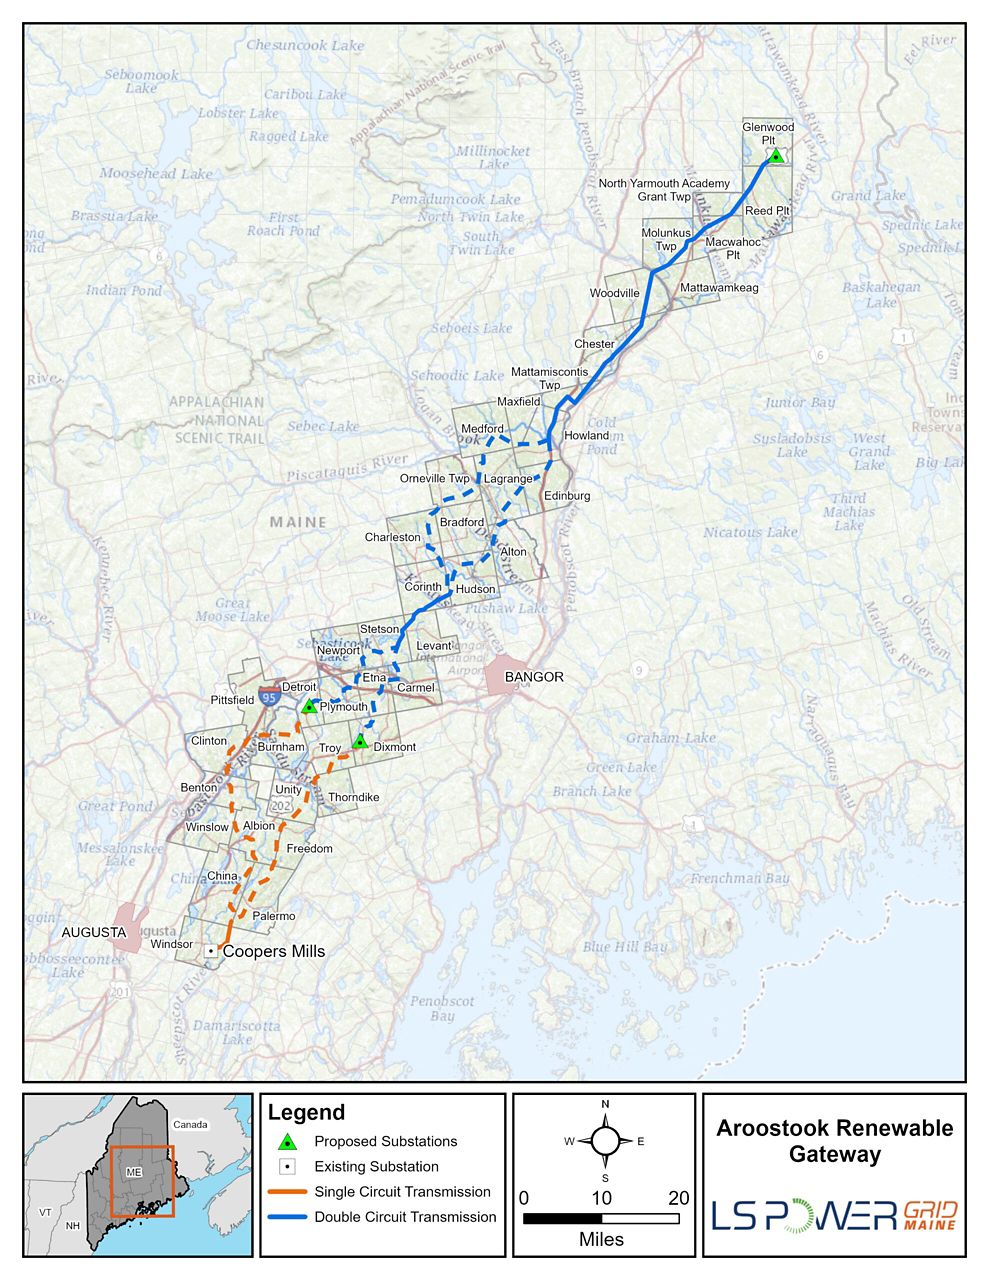 This map shows proposed routes for a new power corridor from Aroostook County to Kennebec County. (LS Power Grid Maine map)